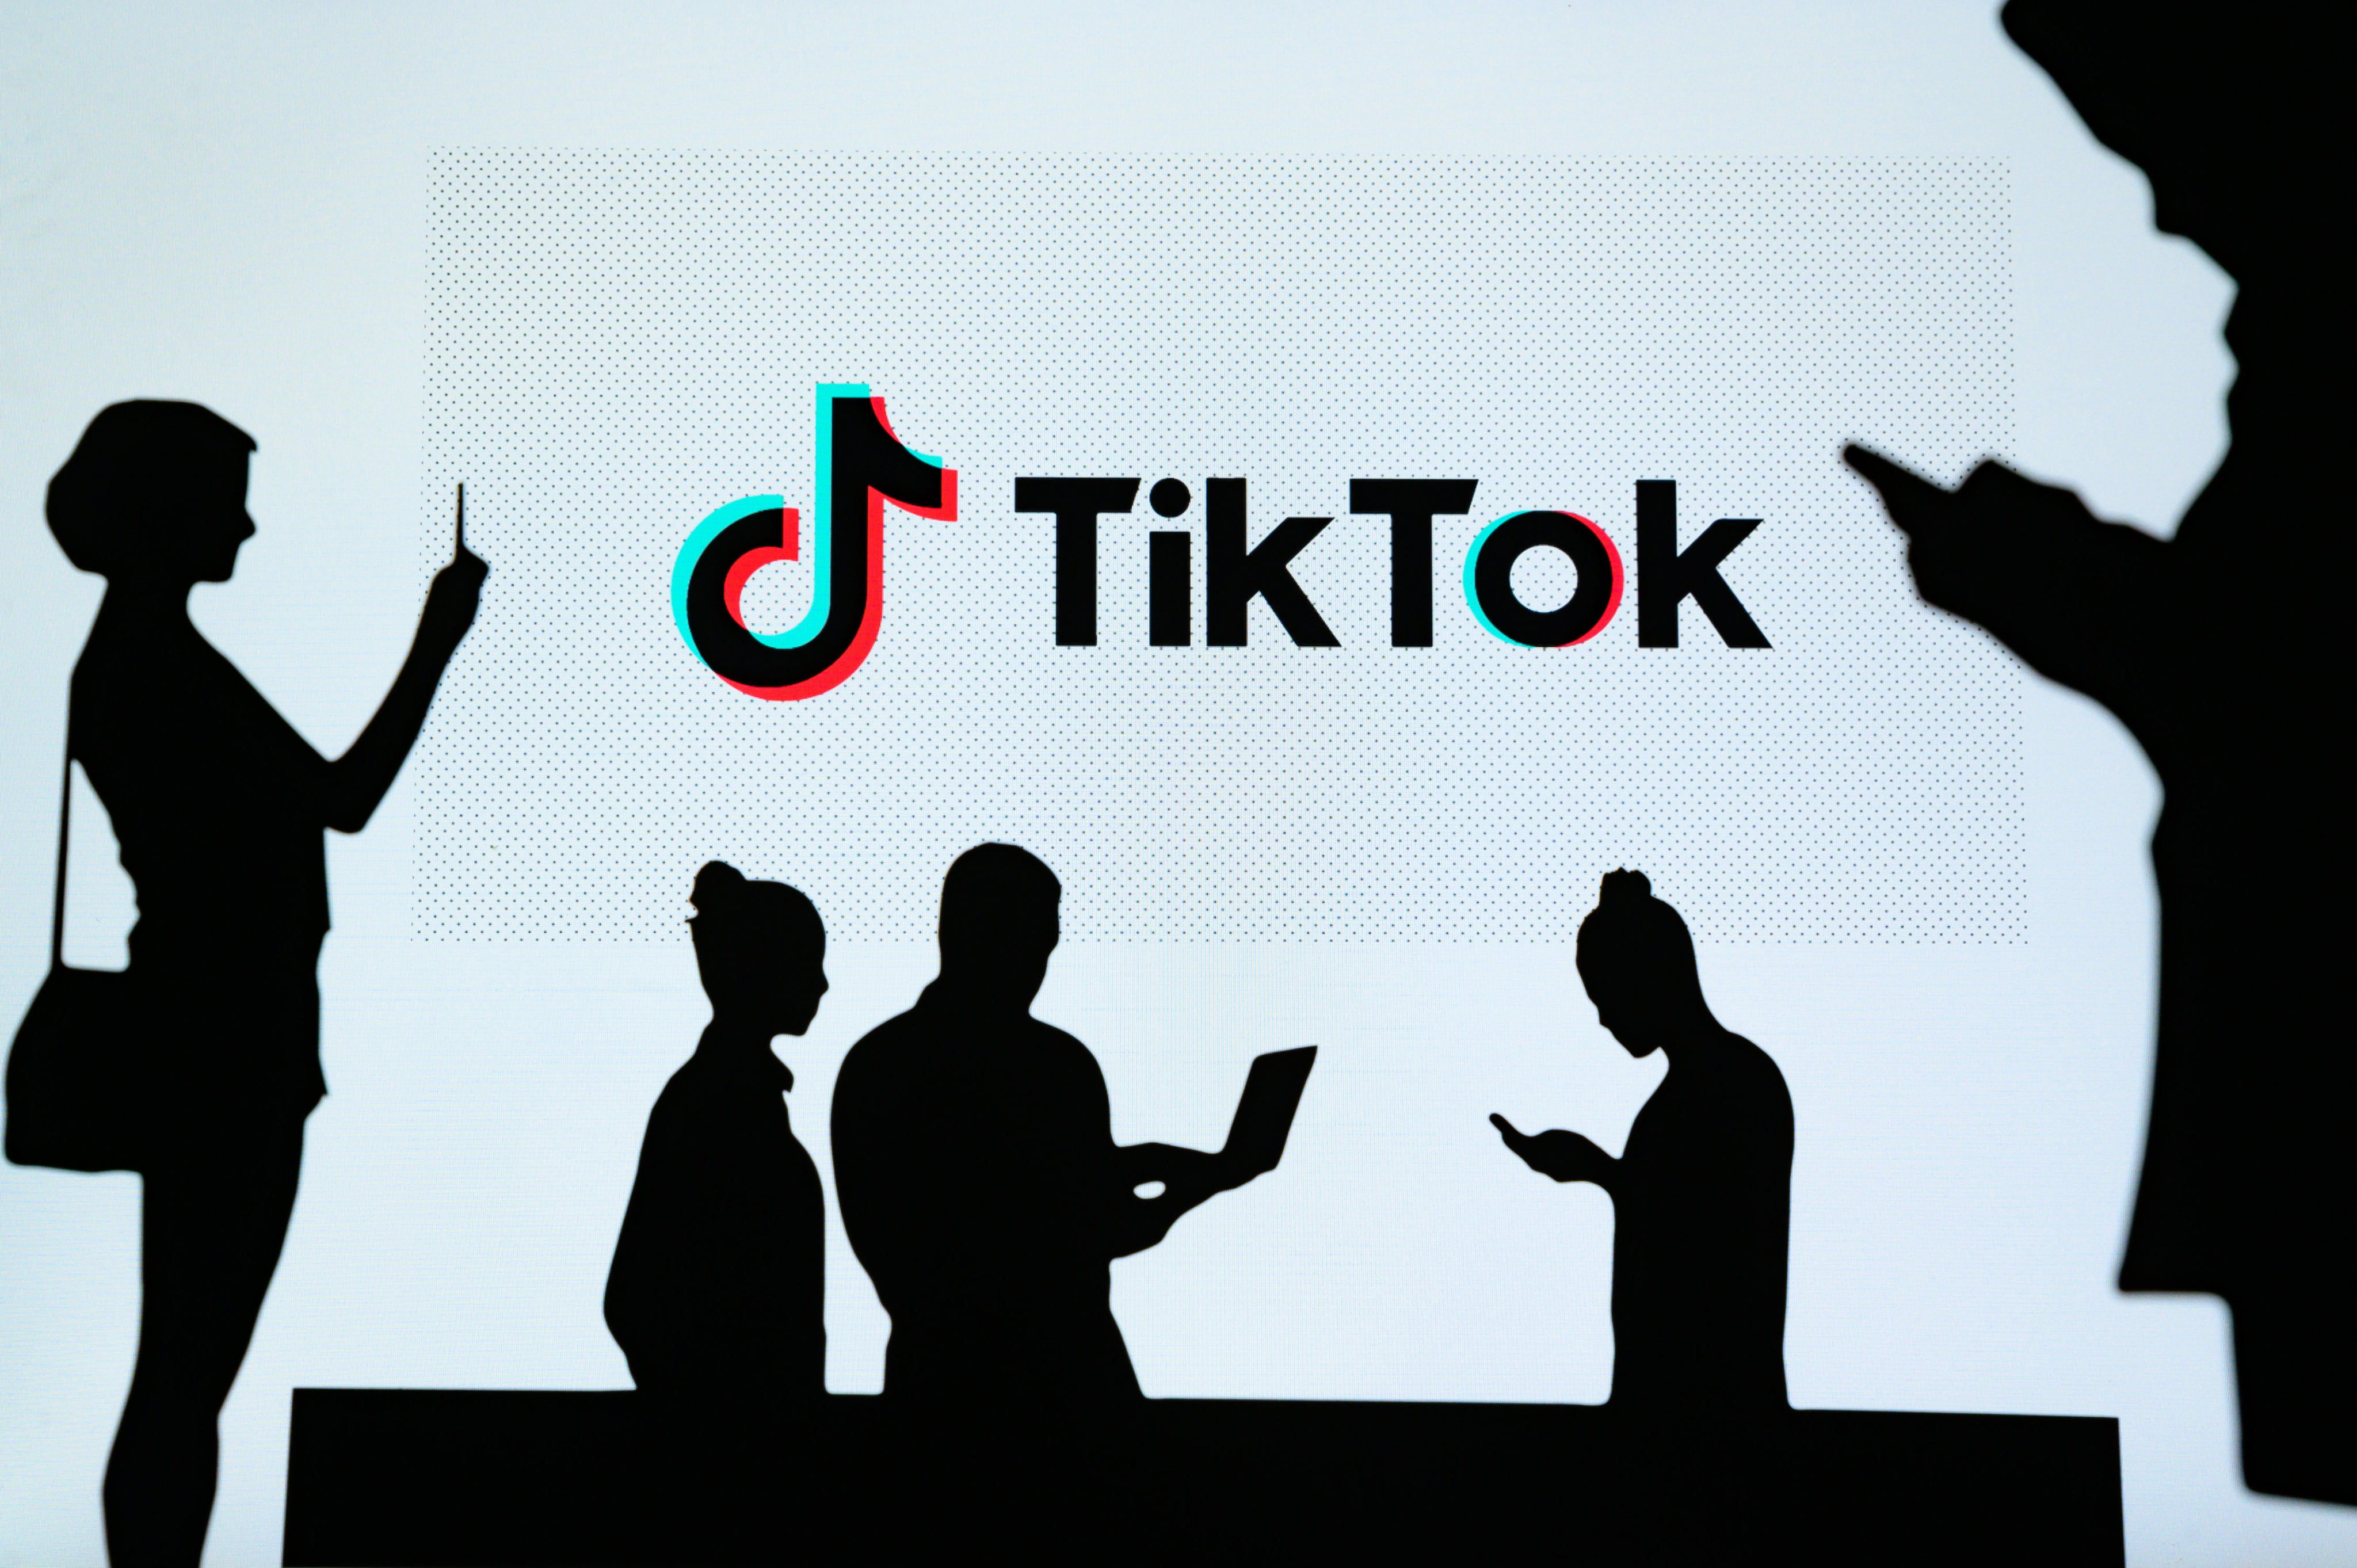 Research has found TikTok has a role in easing the spread of hate speech as well as misinformation and disinformation. Photo: Shutterstock